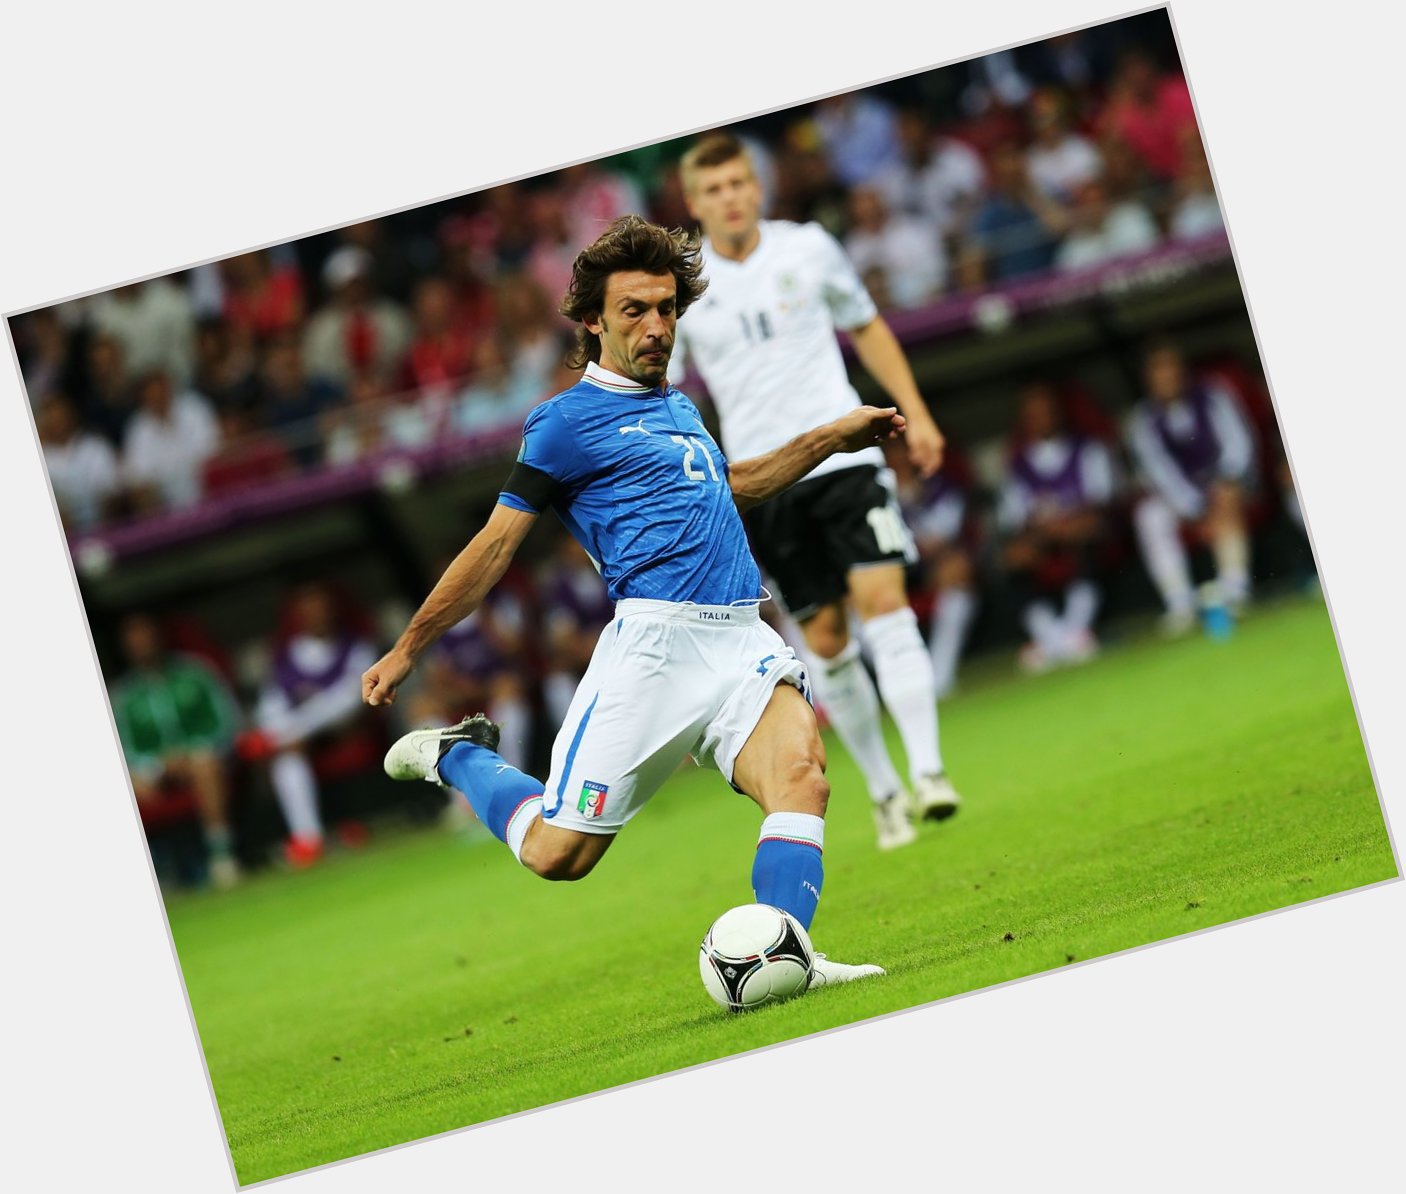   Happy birthday to an Italy legend, Andrea Pirlo  116 appearances 2006 World Champion  